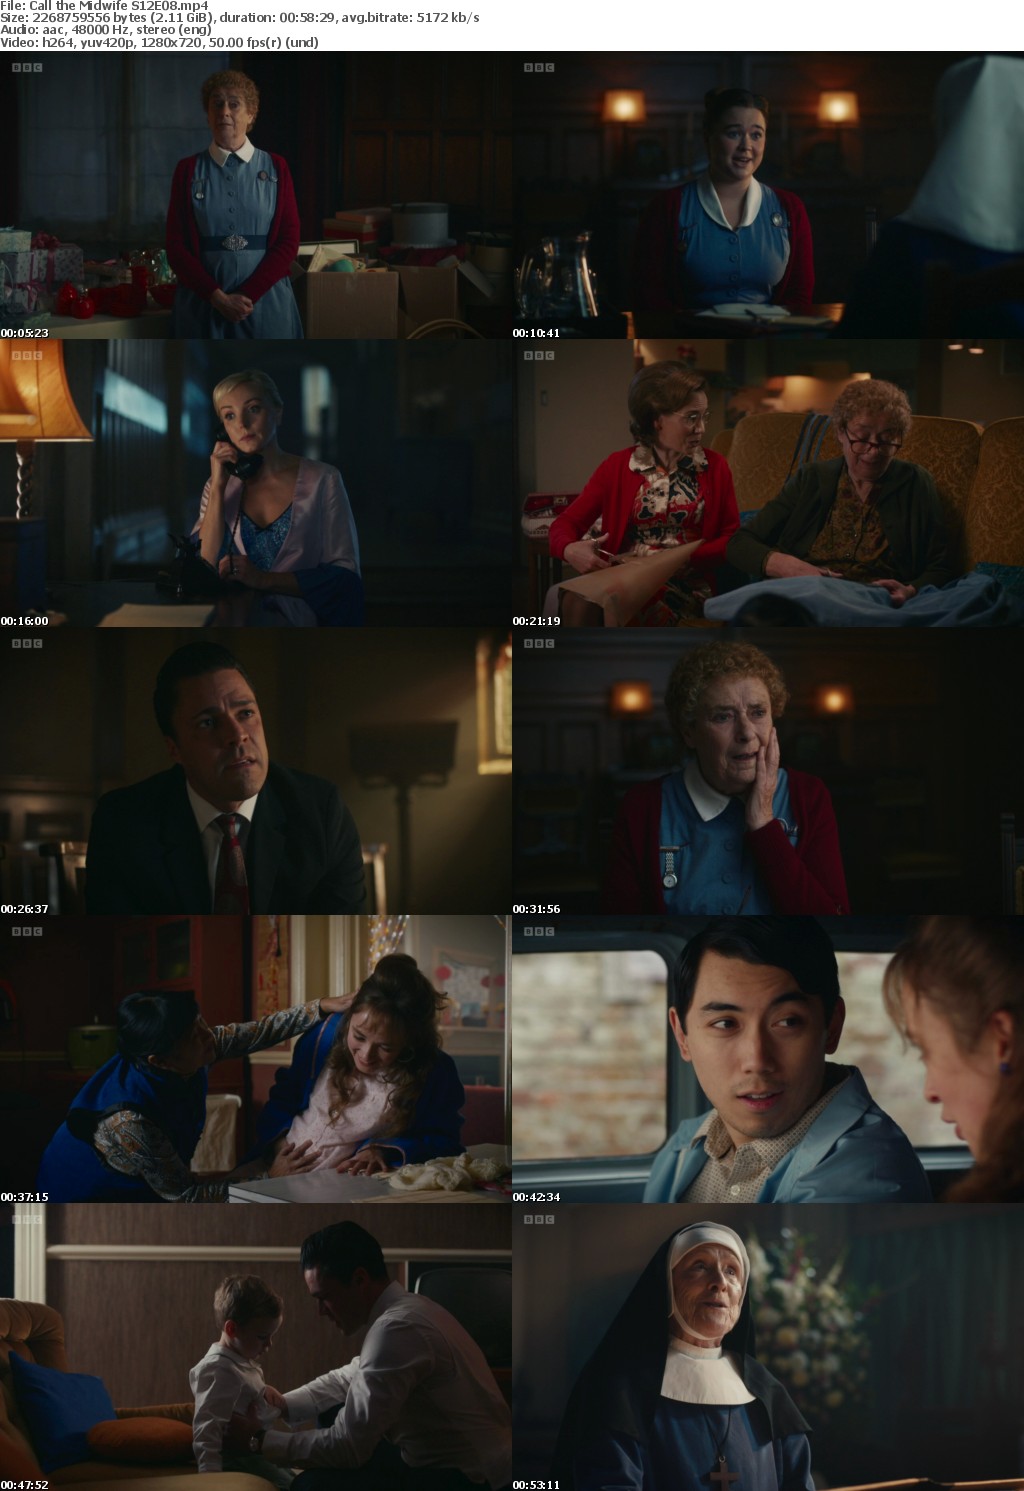 Call the Midwife S12E08 (1280x720p HD, 50fps, soft Eng subs)